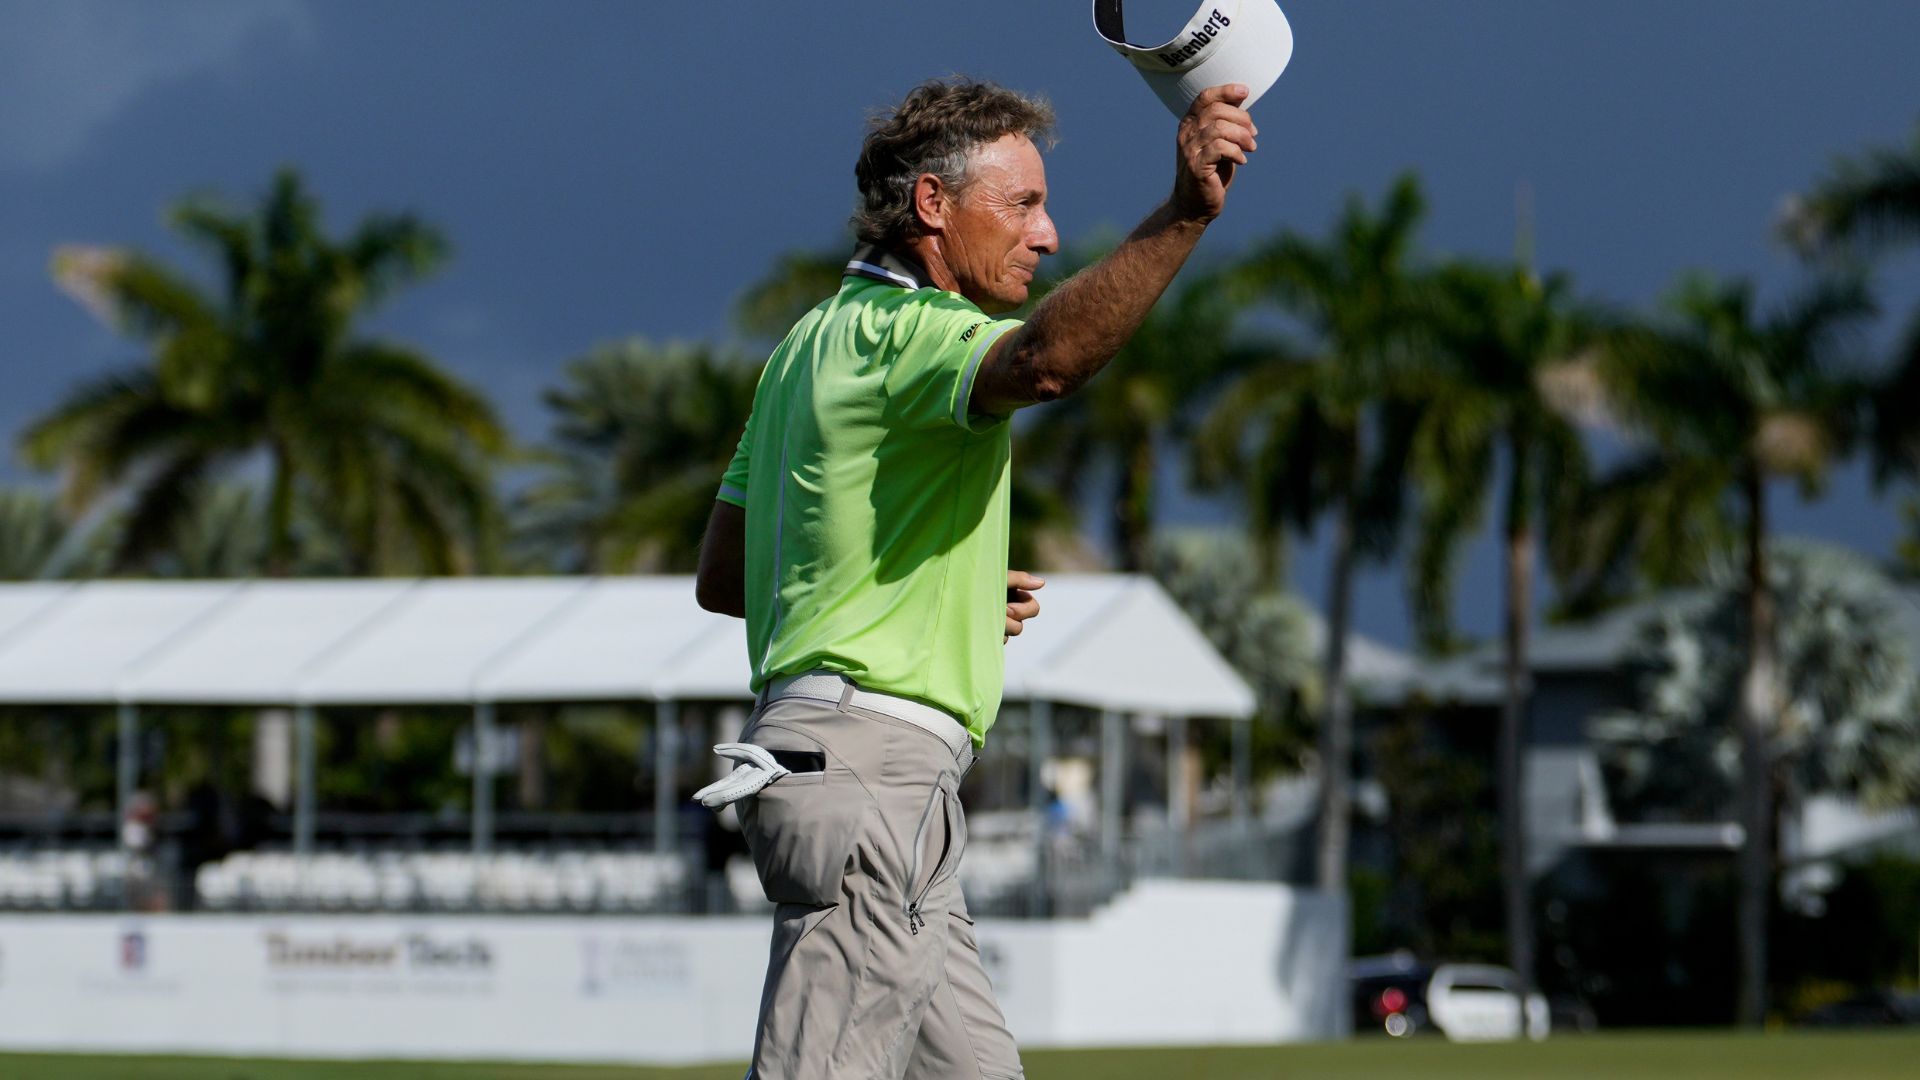 Bernhard Langer beats age by two to take TimberTech lead into the final round